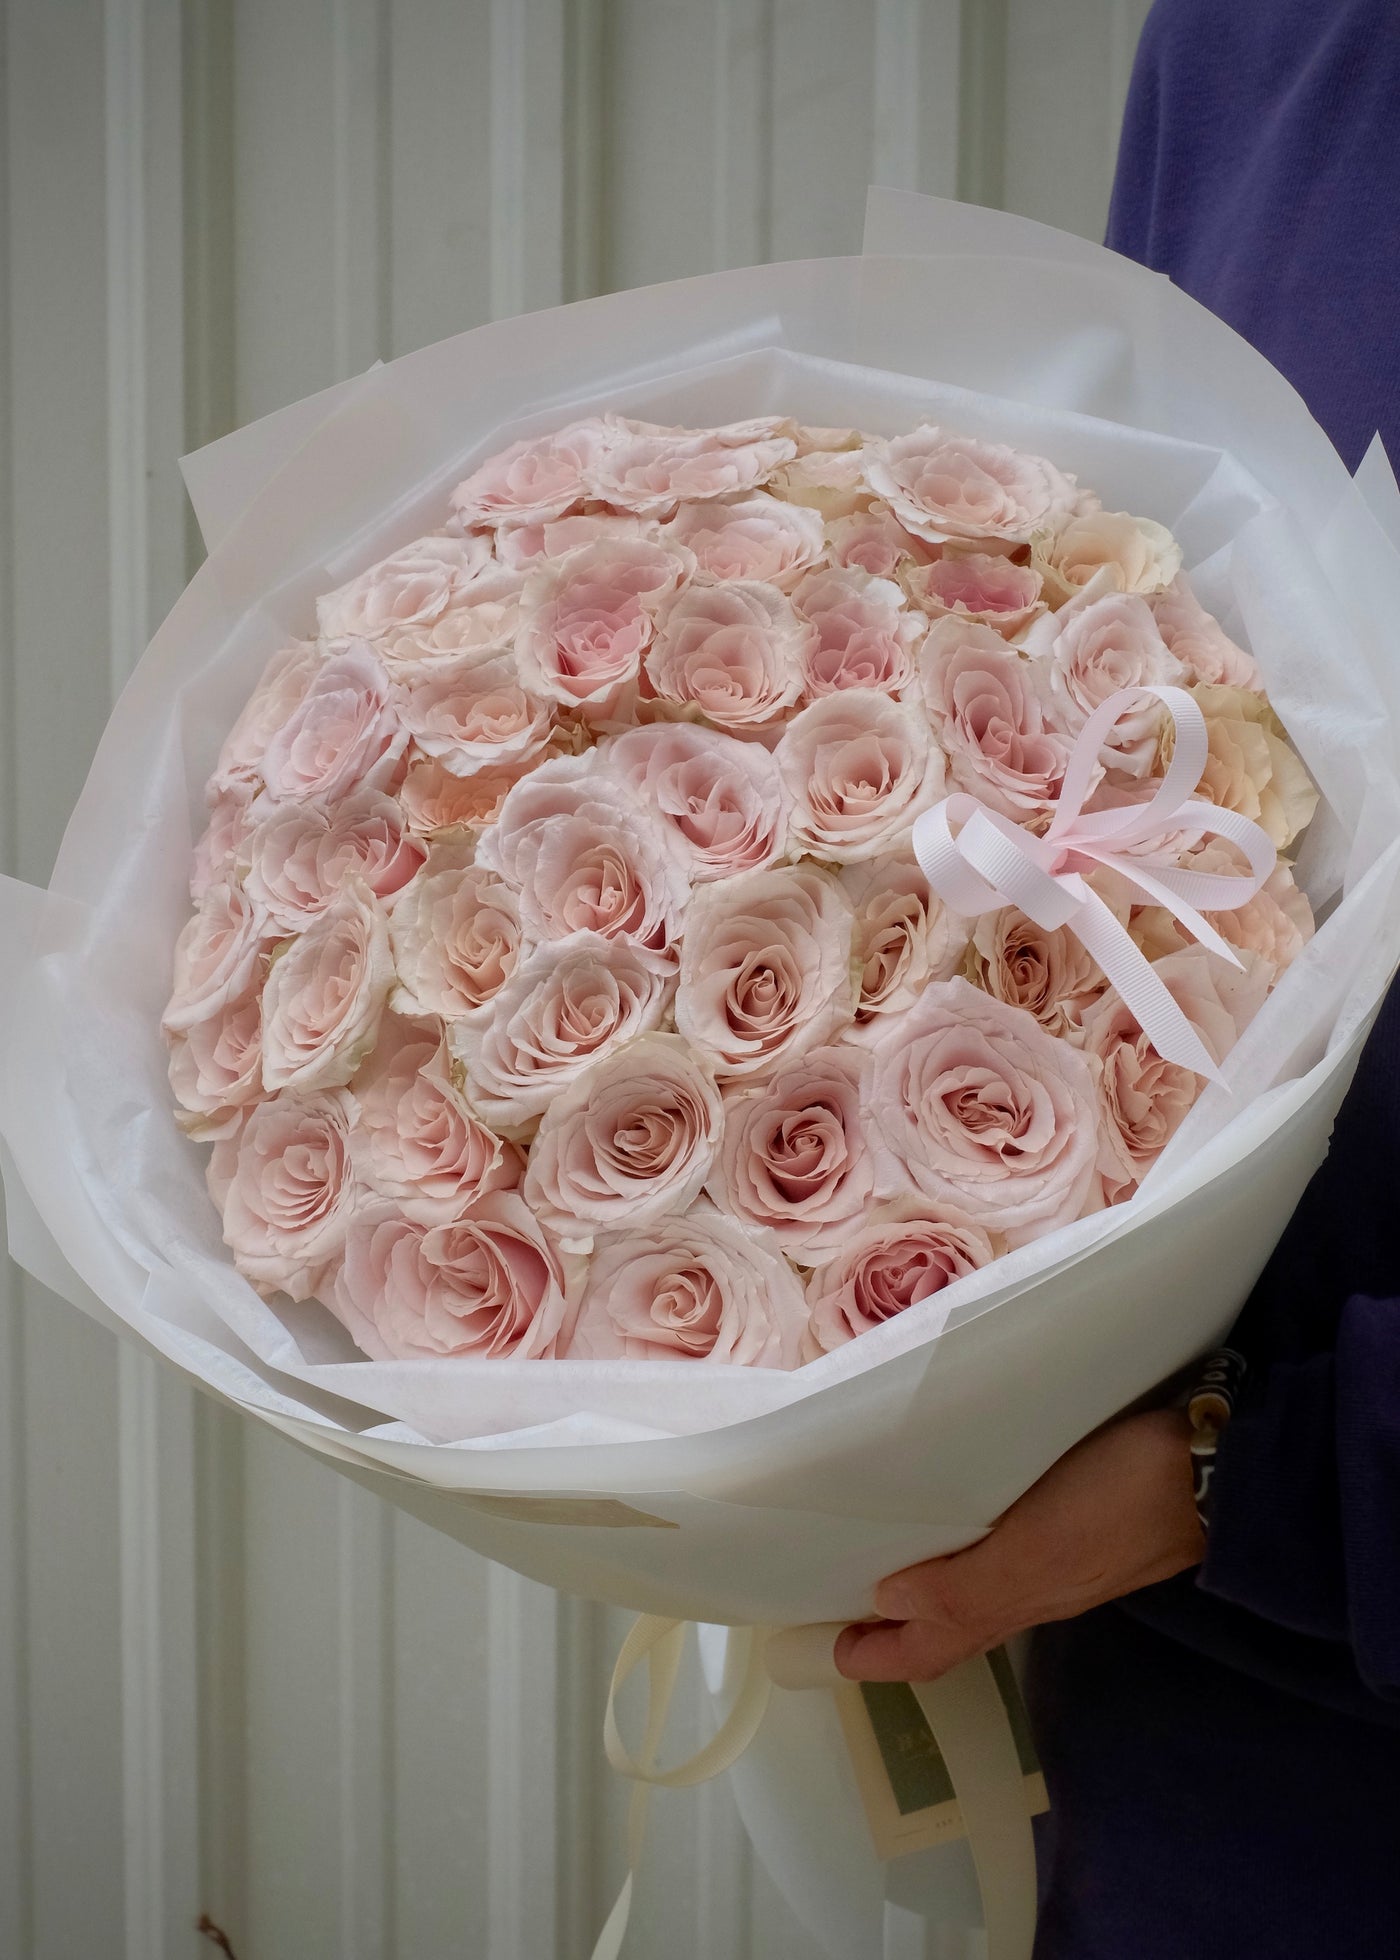 Ecuador quicksand roses same day bouquet delivery in Penang for Valentine's Day, leading online florist in Georgetown Penang